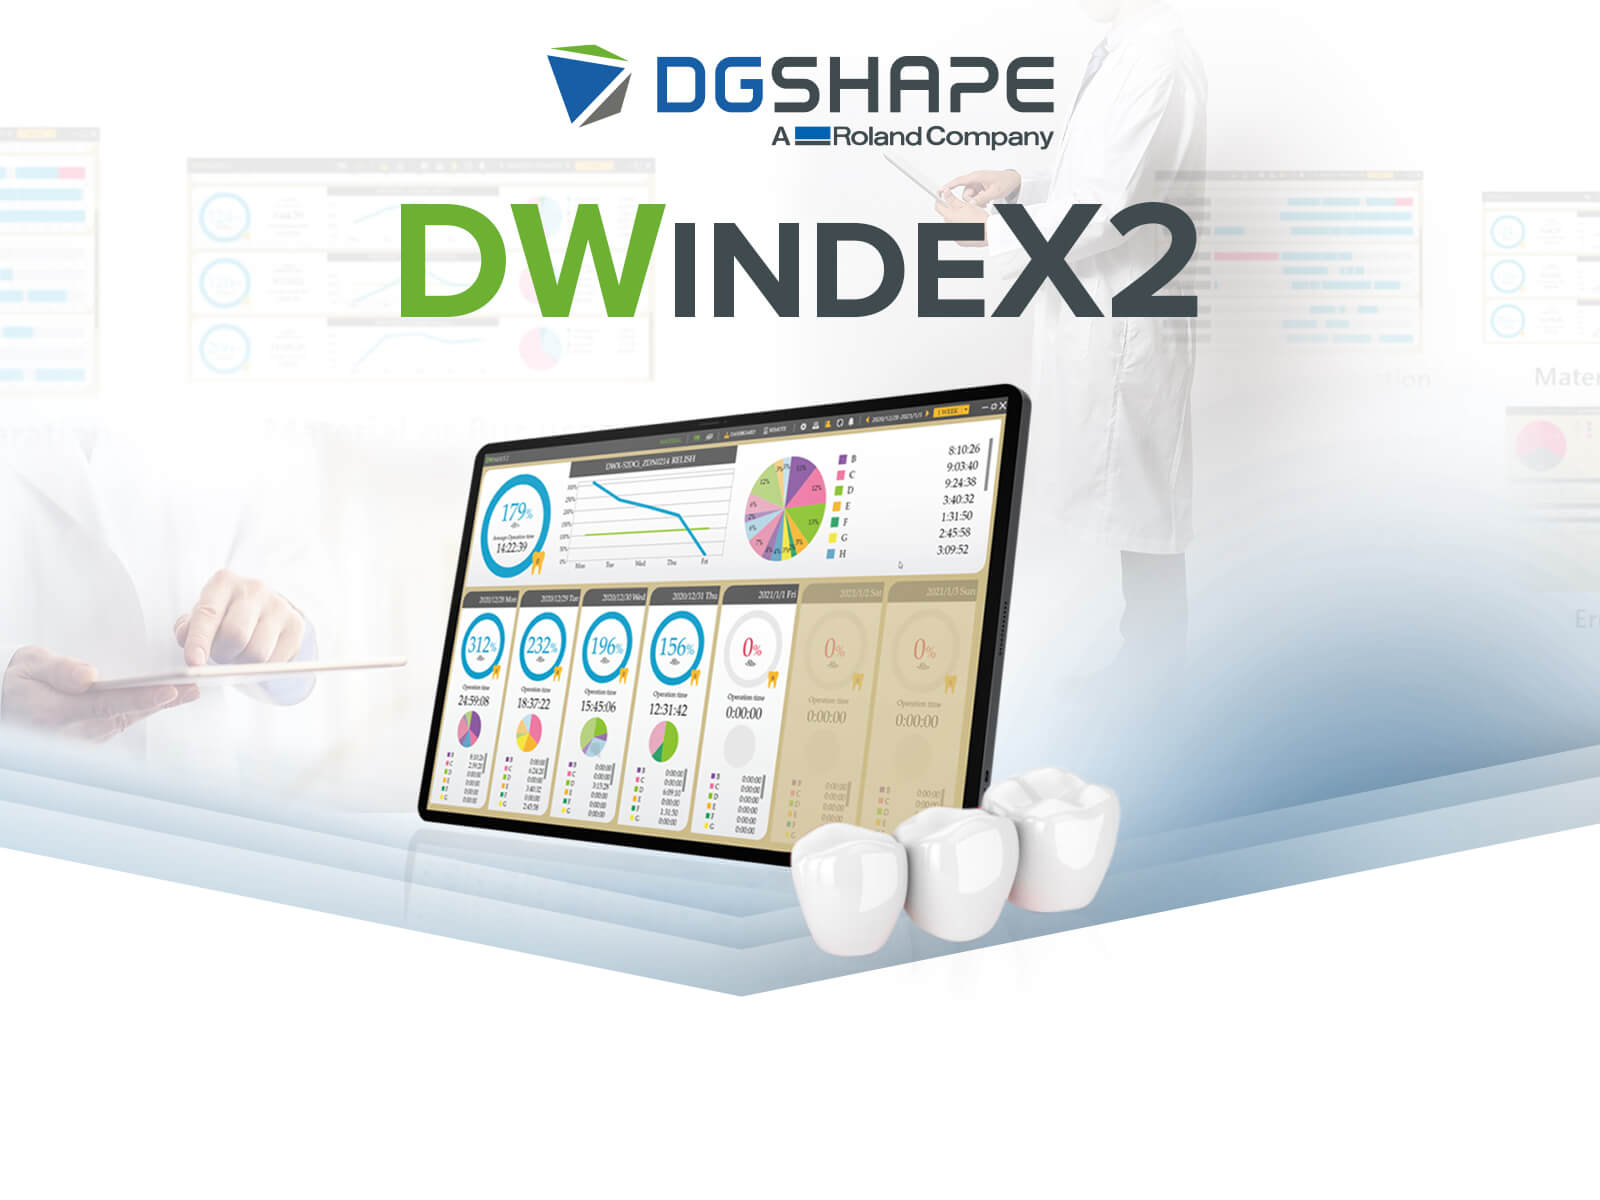 DGSHAPE Americas has announced the release of new DWindeX2 Software for all current DWX series dental mills.